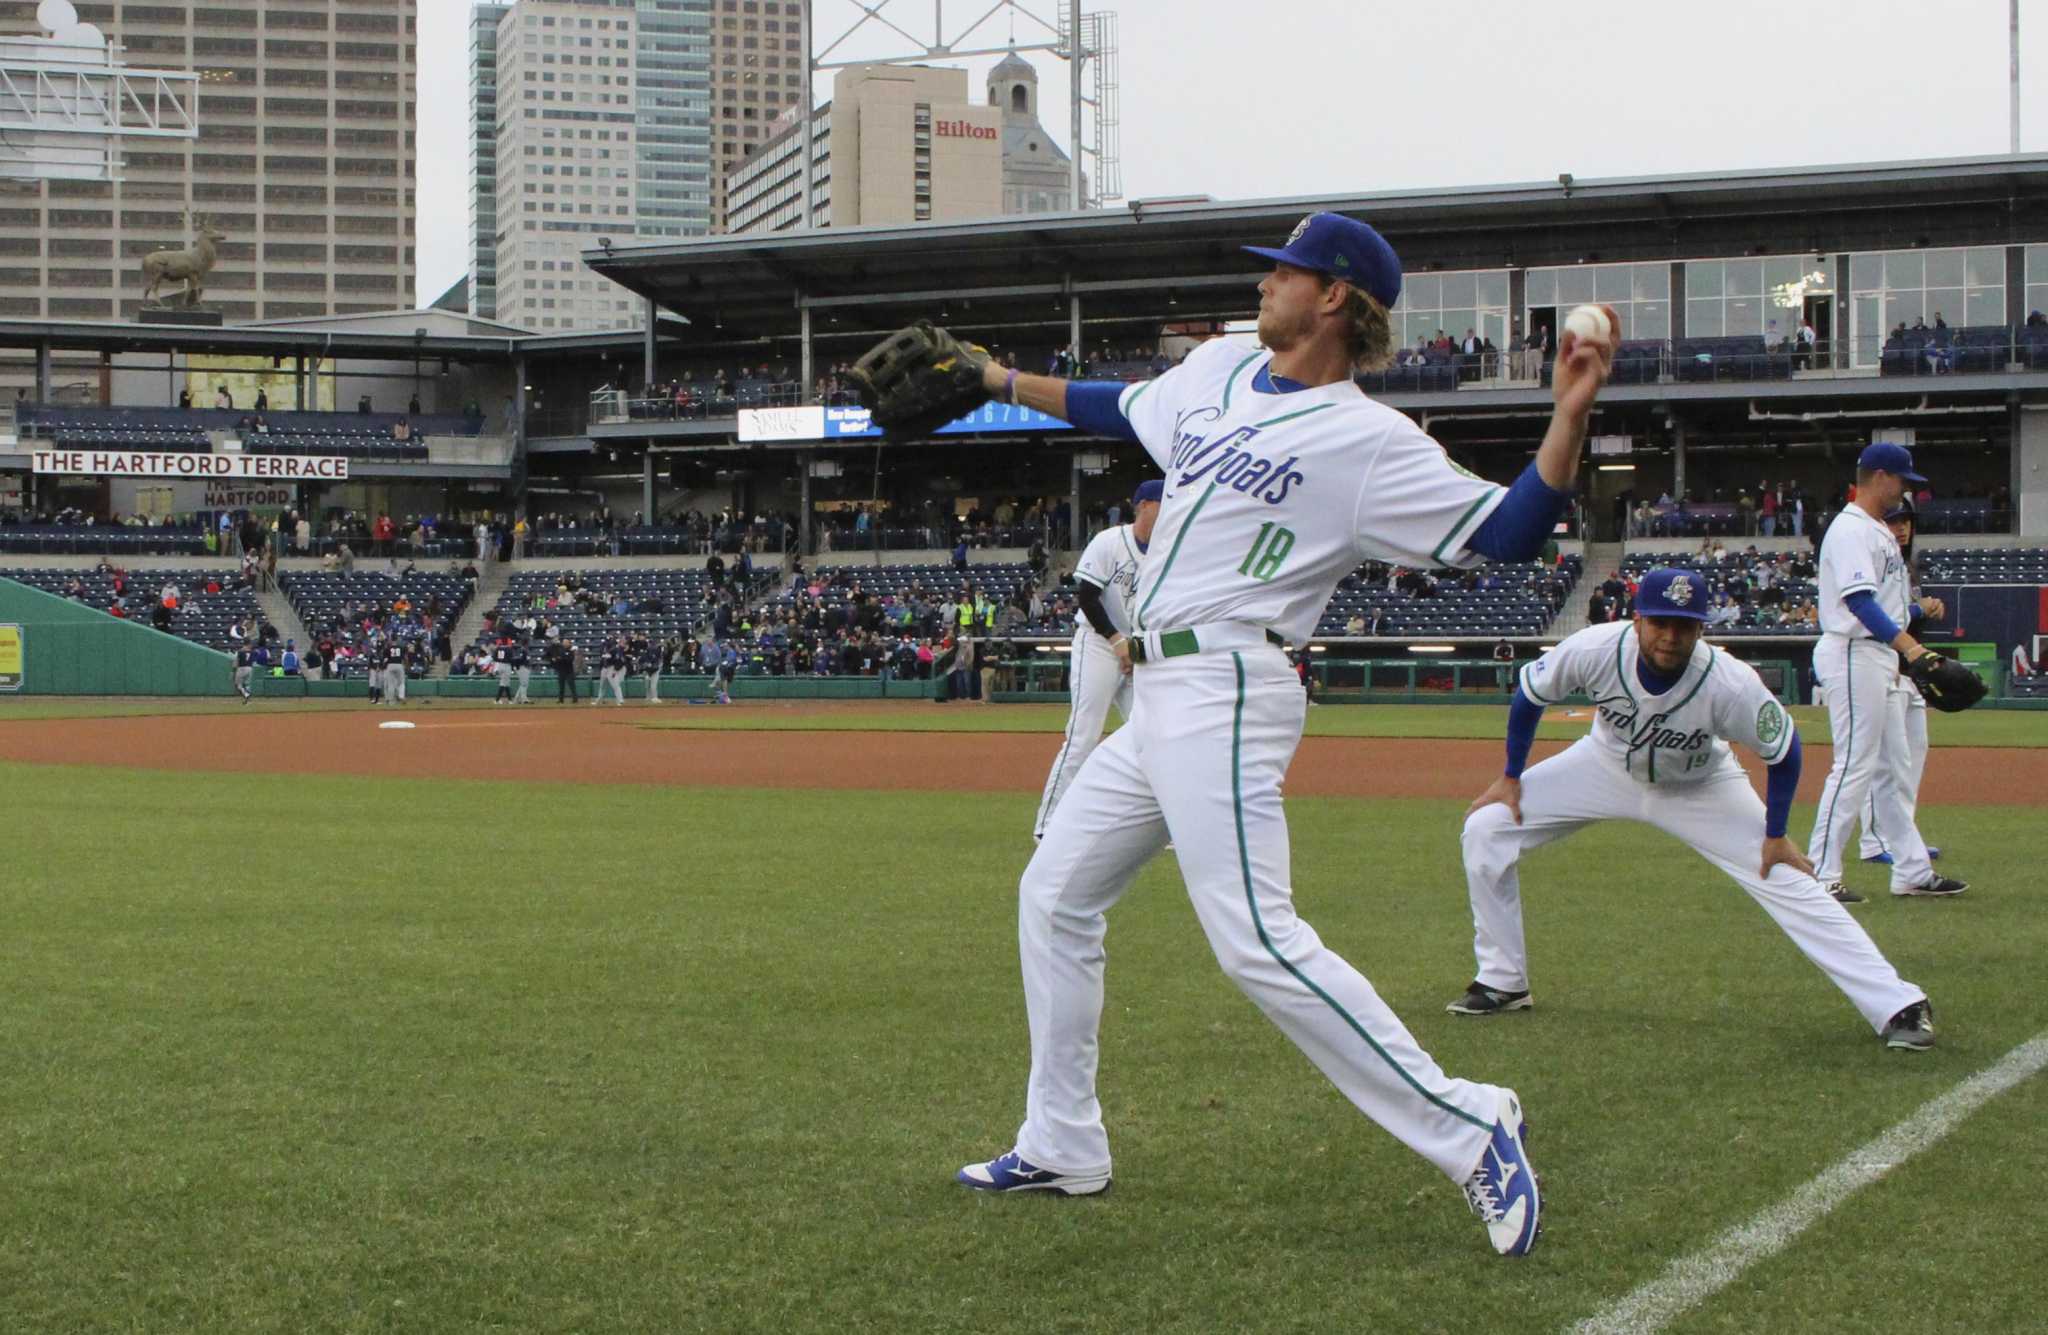 The Hartford Yard Goats will open at 100 percent capacity. Here’s what